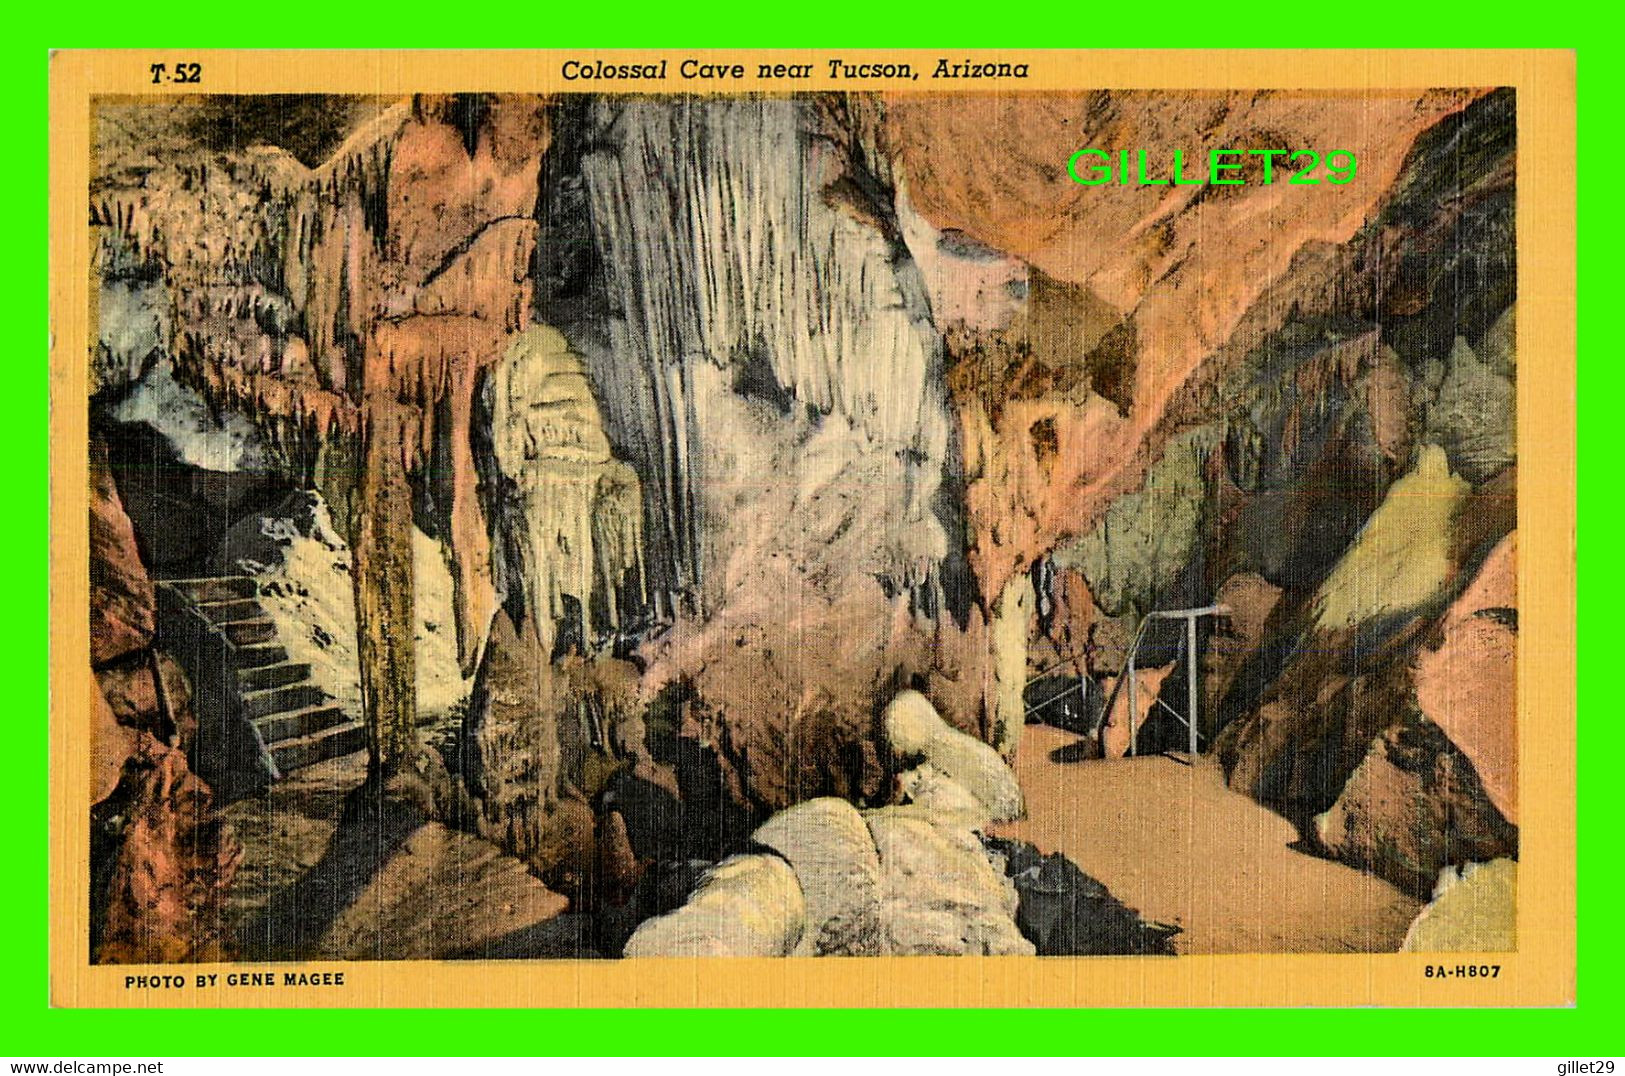 TUCSON, AZ - COLOSSAL CAVE - PHOTO BY GENE MAGEE - TRAVEL IN 1952 - LOLLESGARD SPECIALTY CO - - Tucson